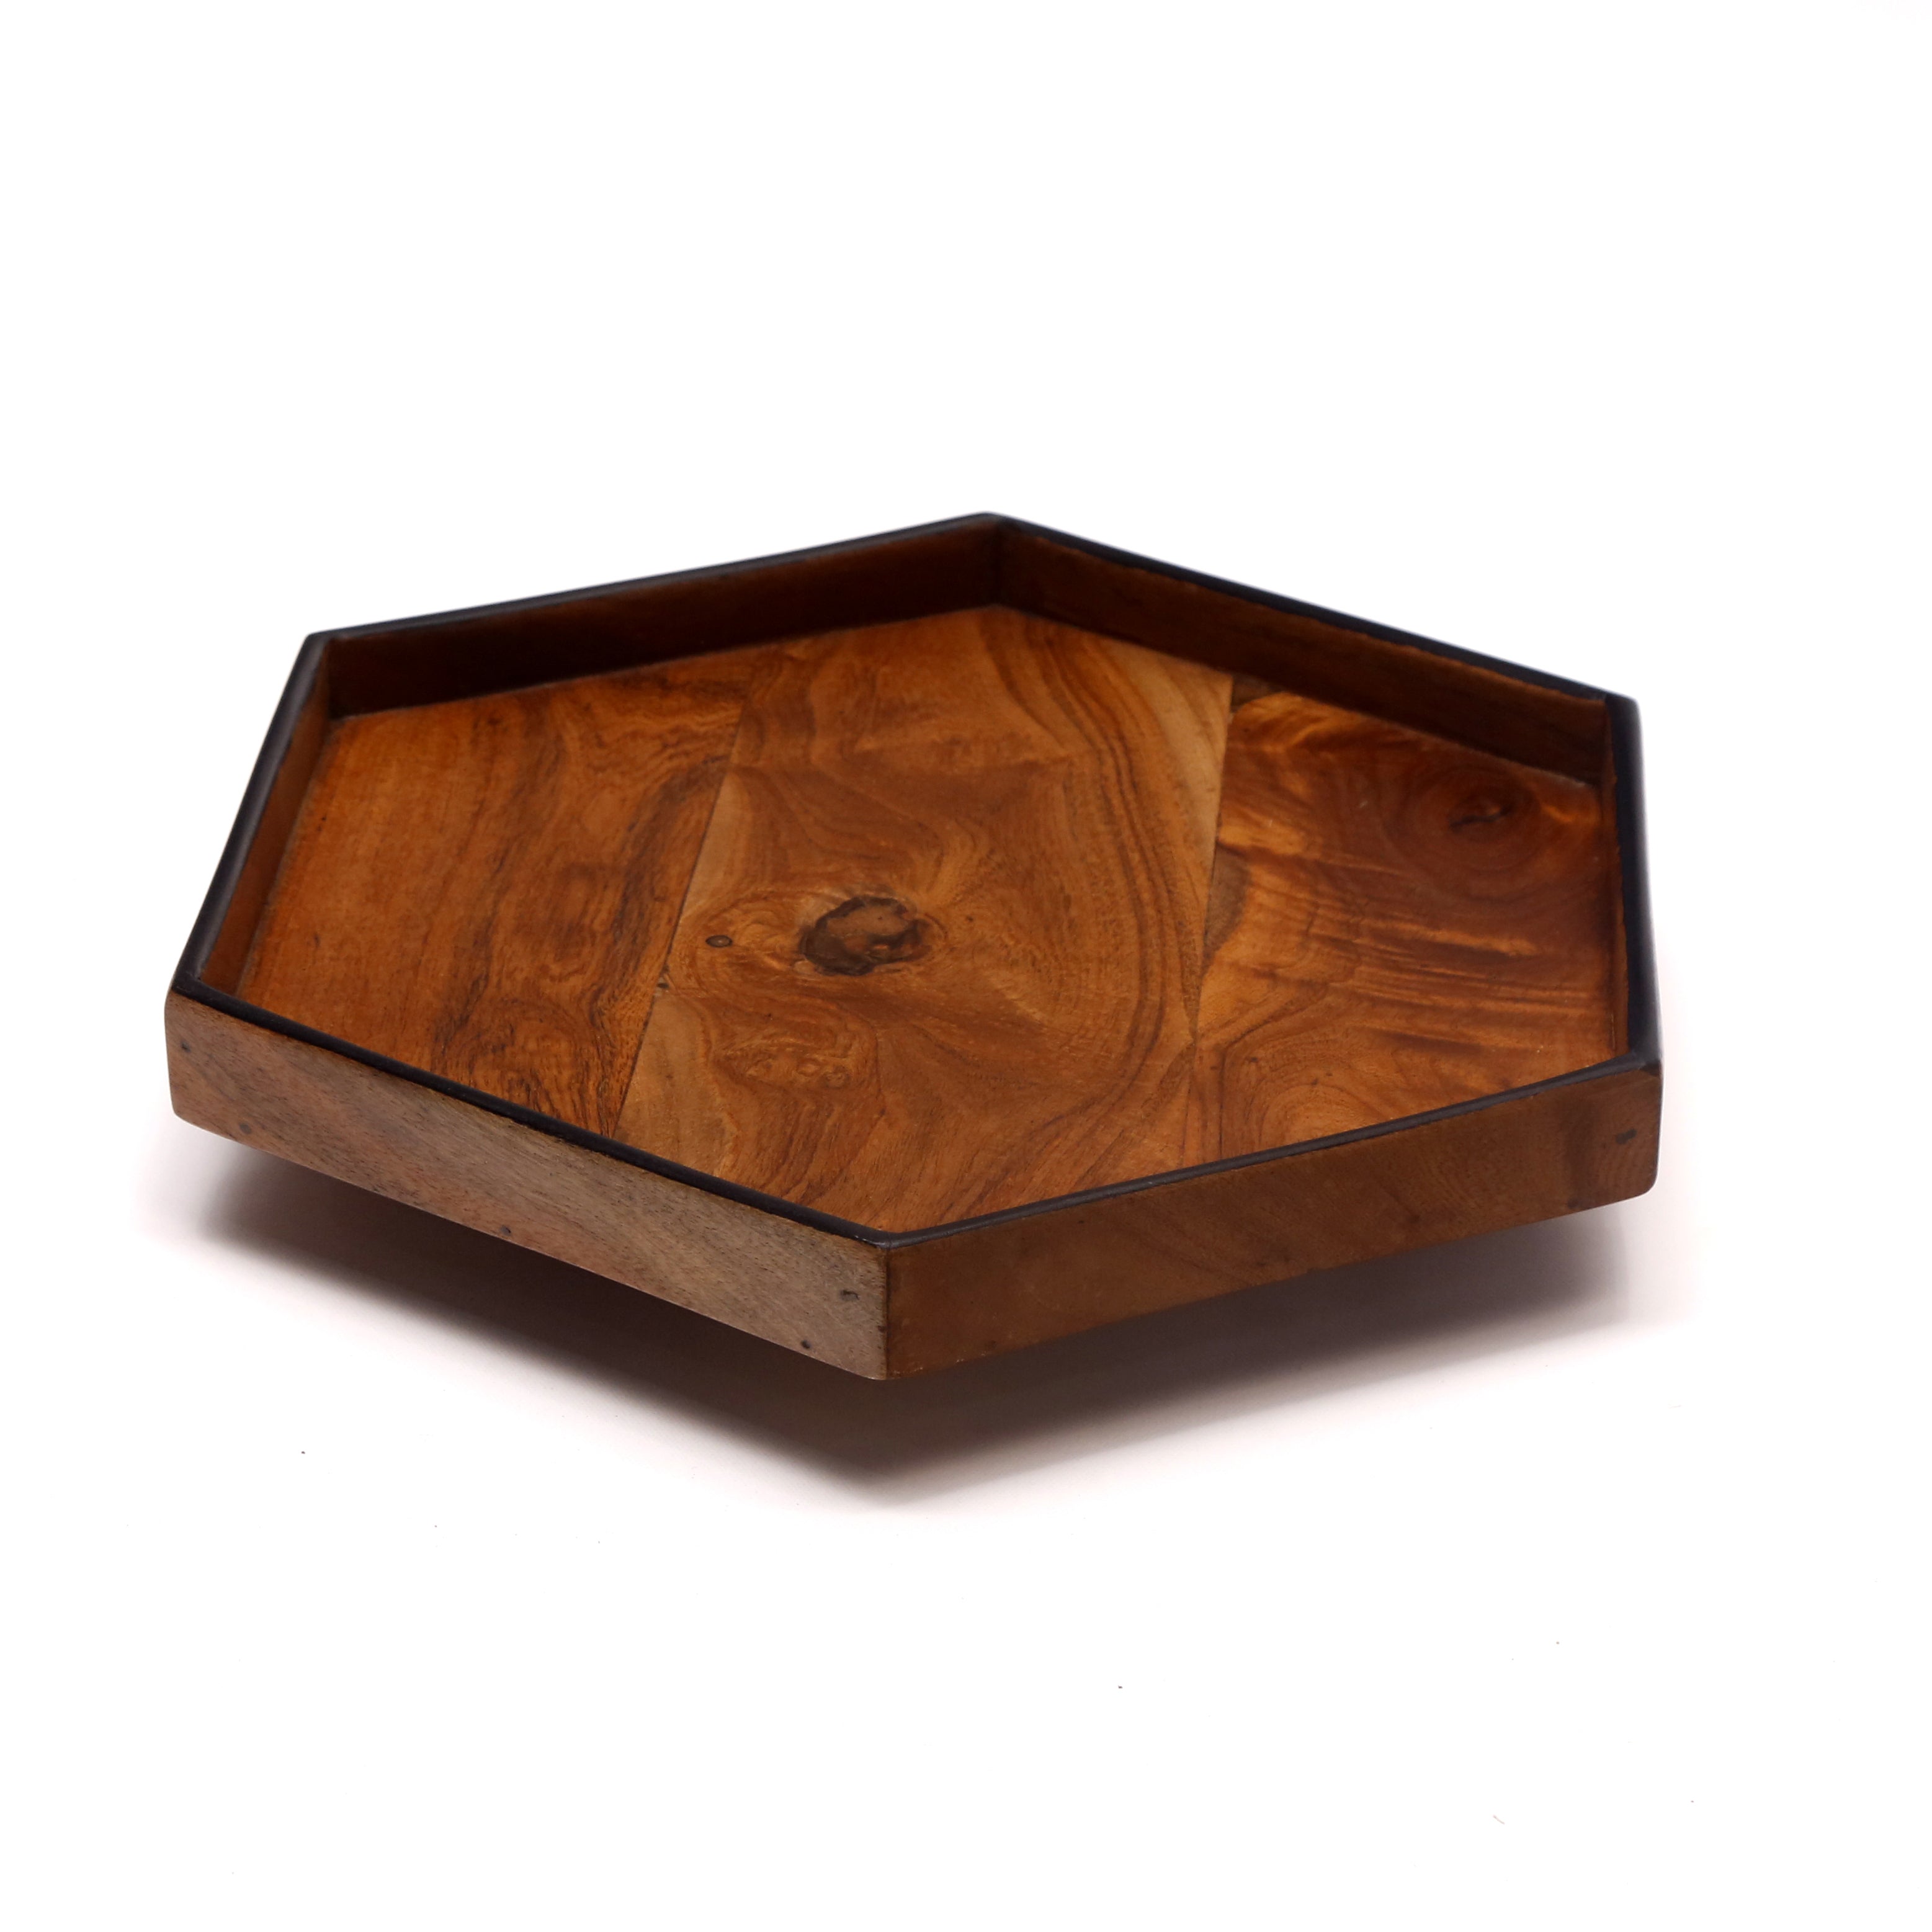 Abstract Shaped Wooden Platter Tray